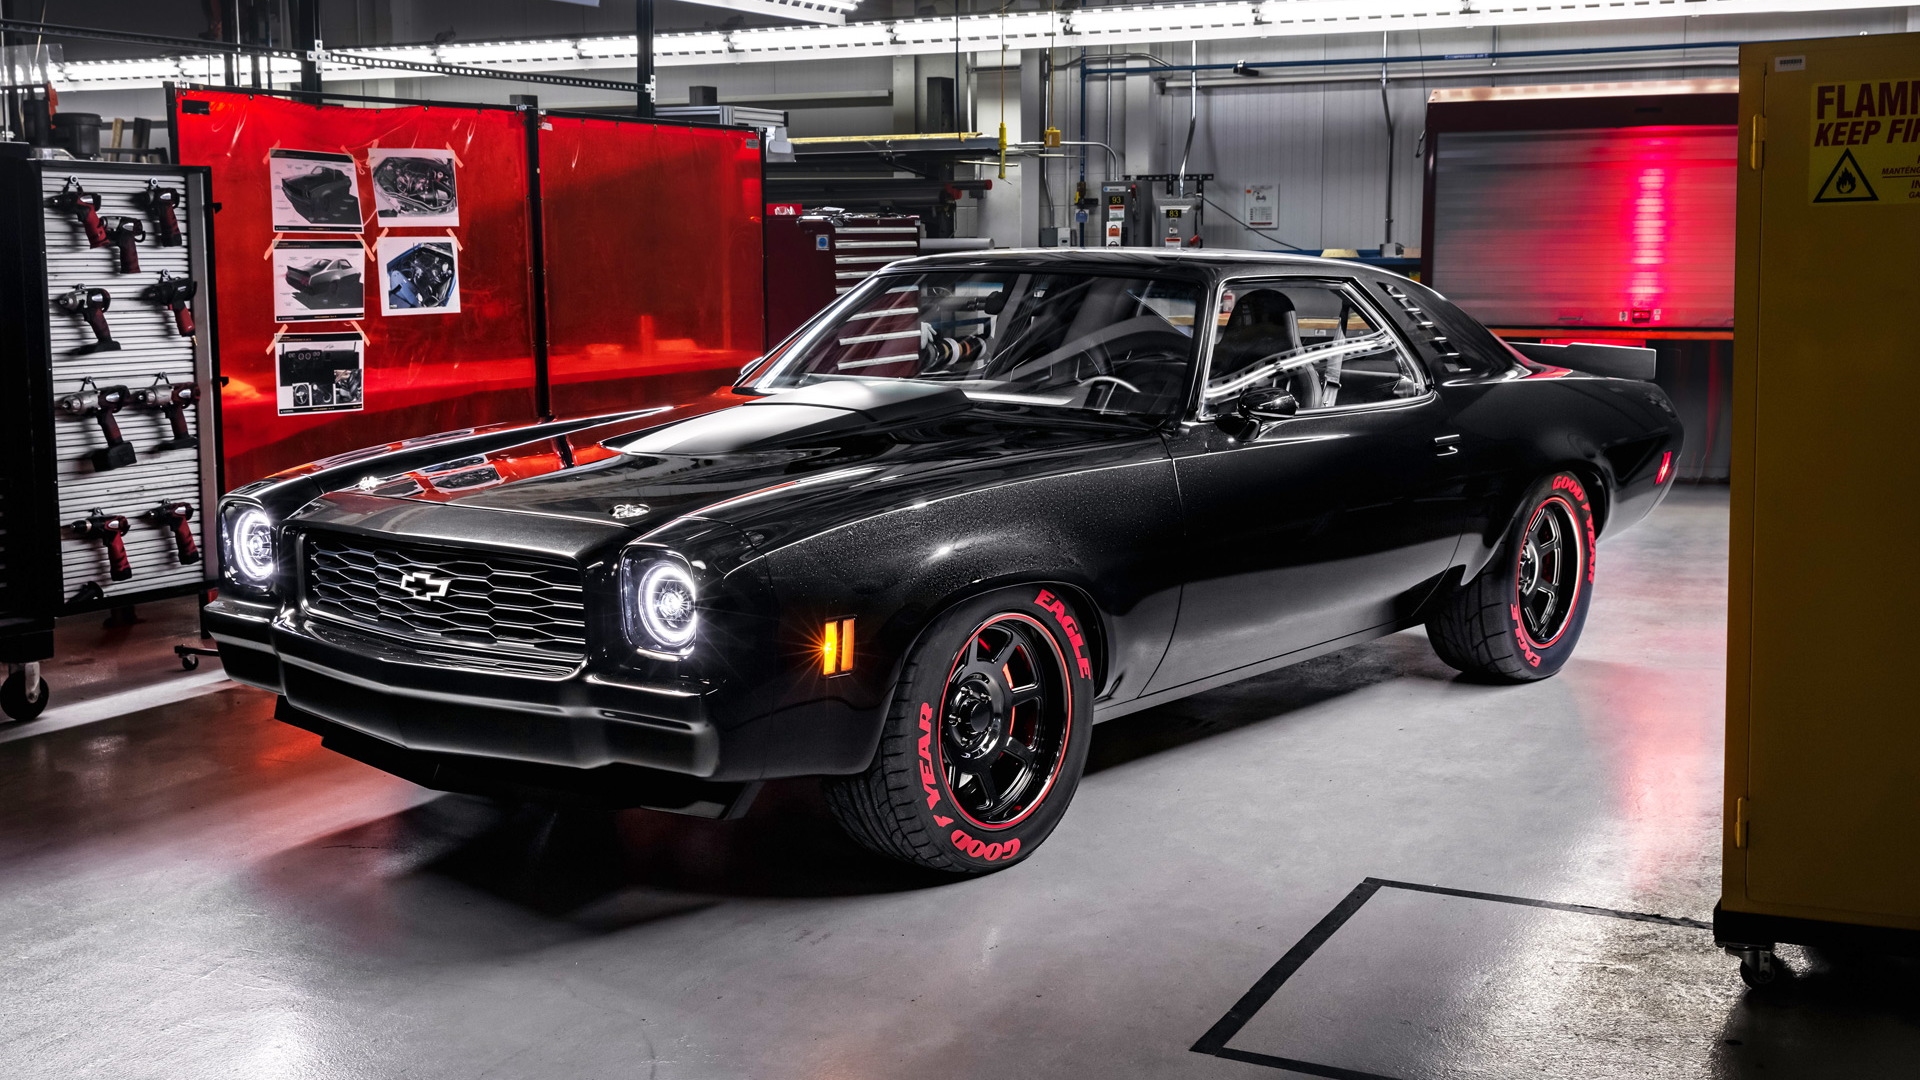 1973 Chevrolet Chevelle Laguna fitted with LT5 6.2-liter supercharged V-8 crate engine